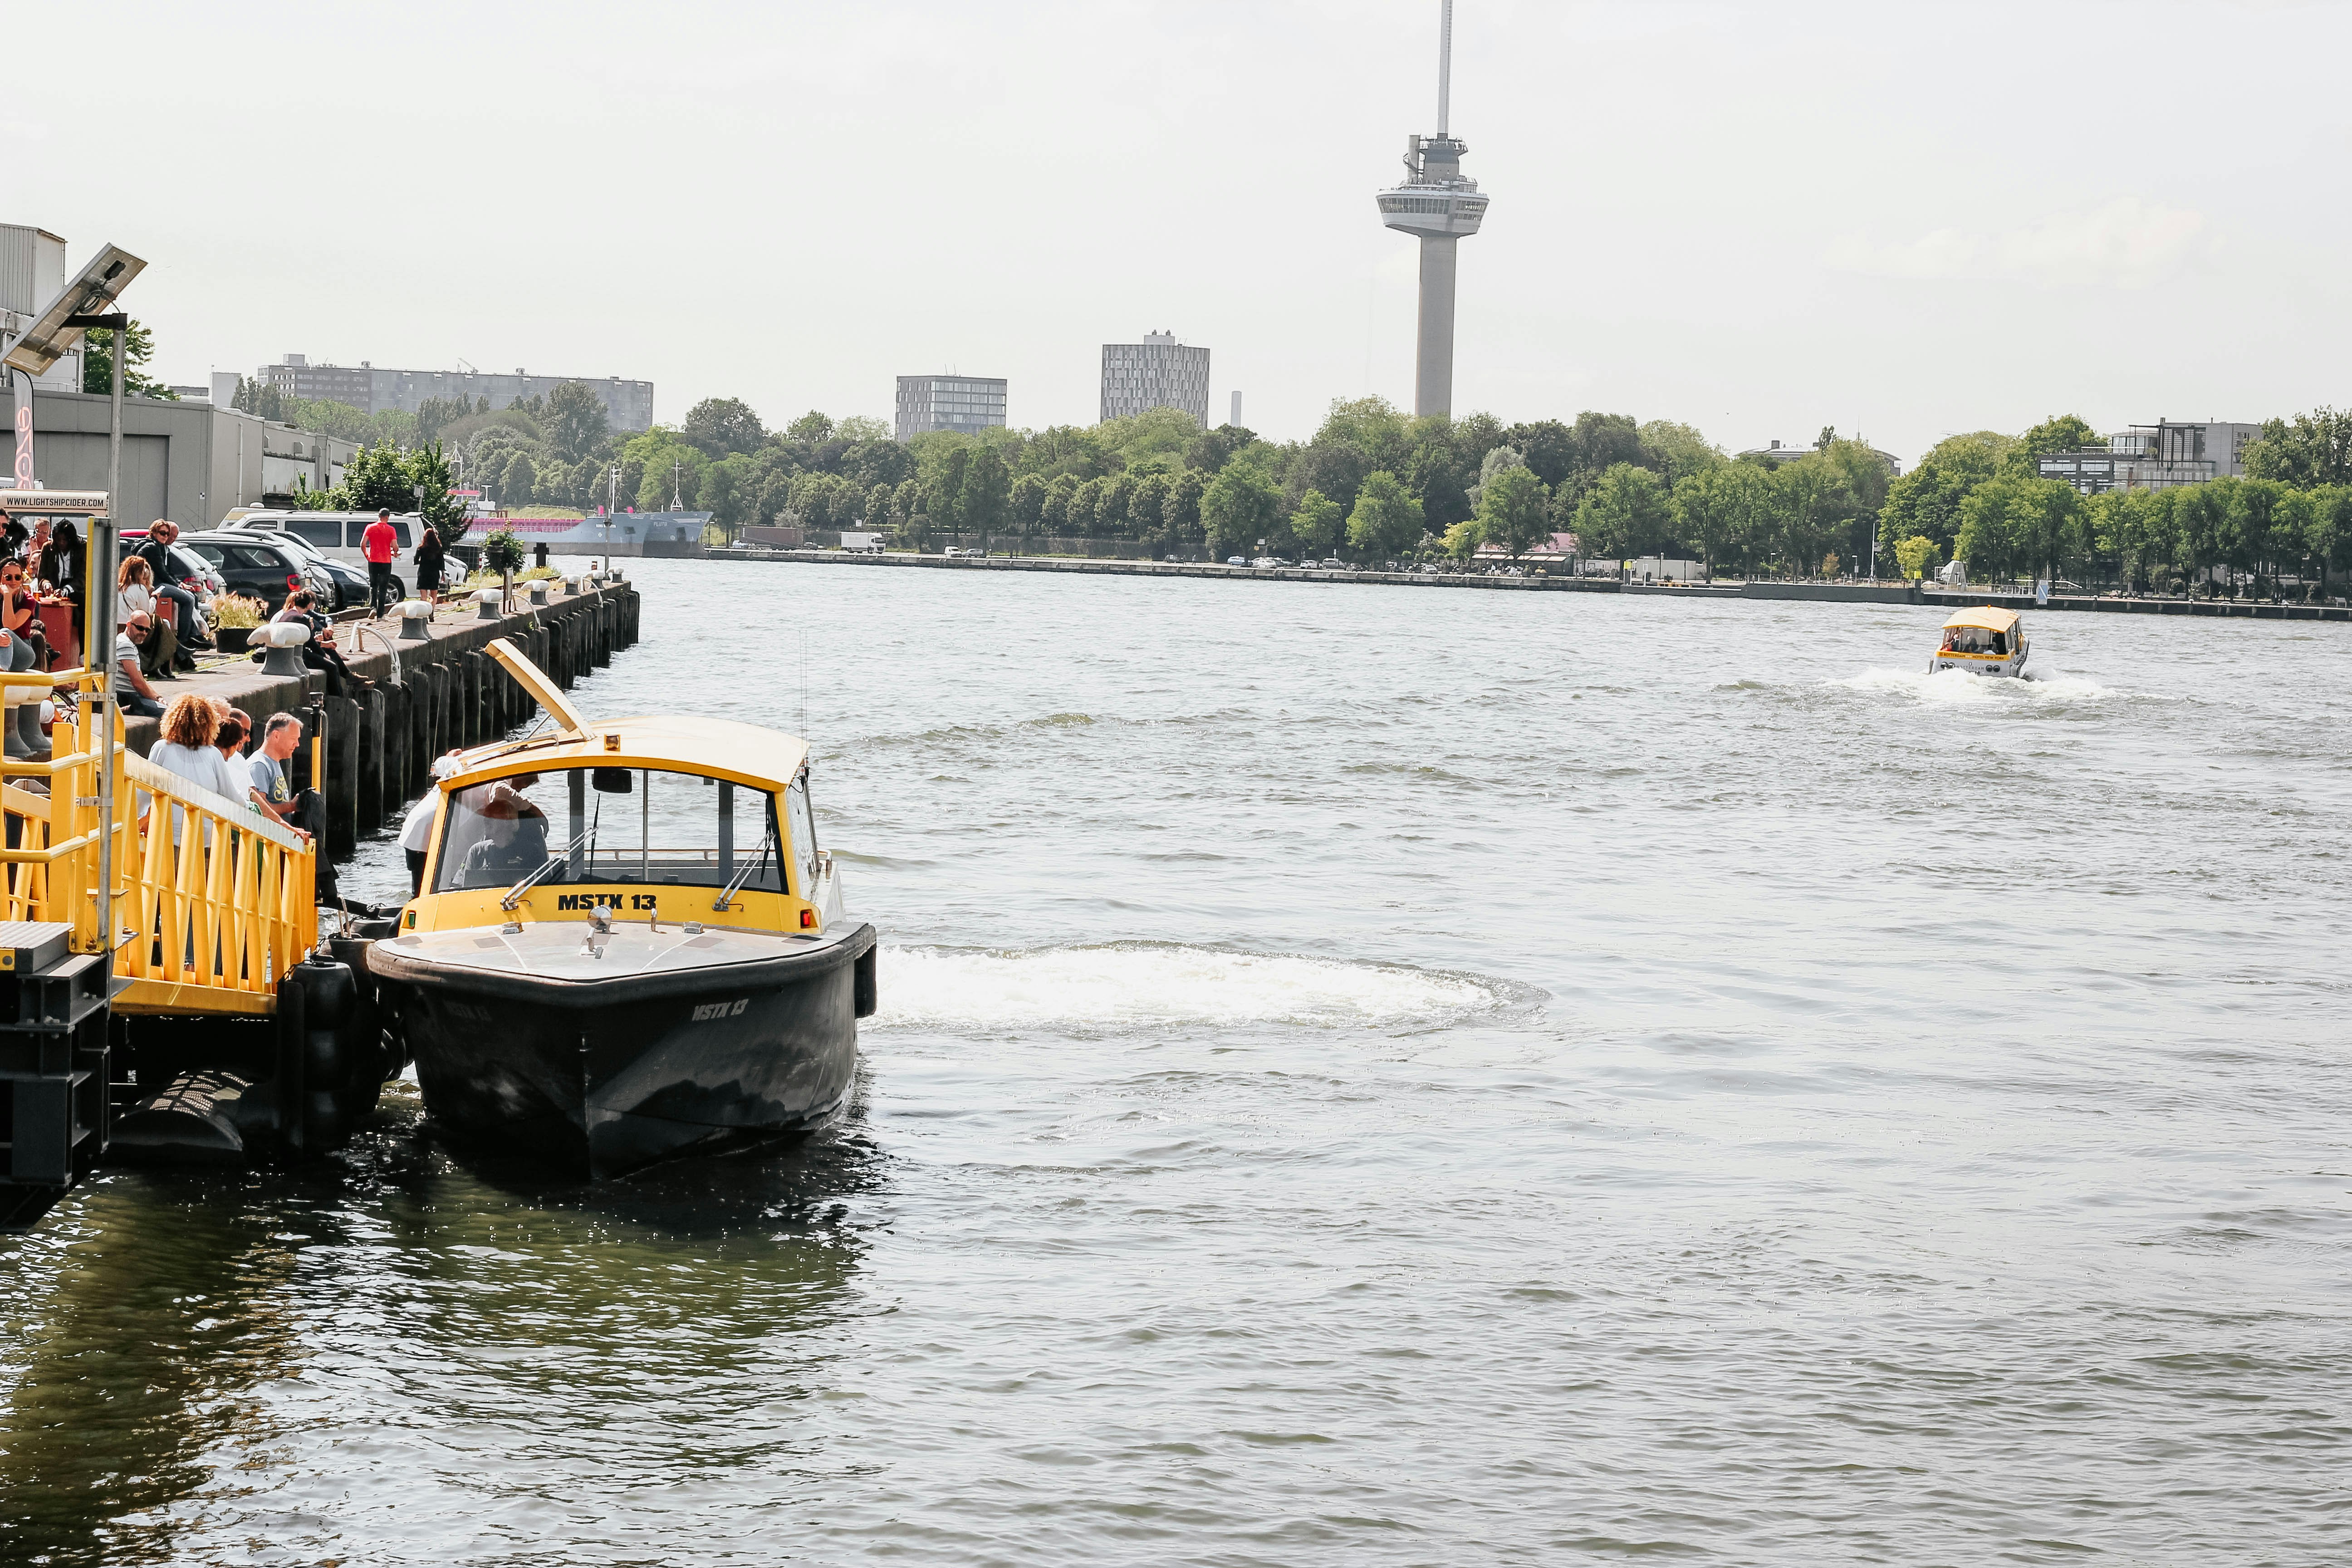 white, black, and yellow boat on body of water